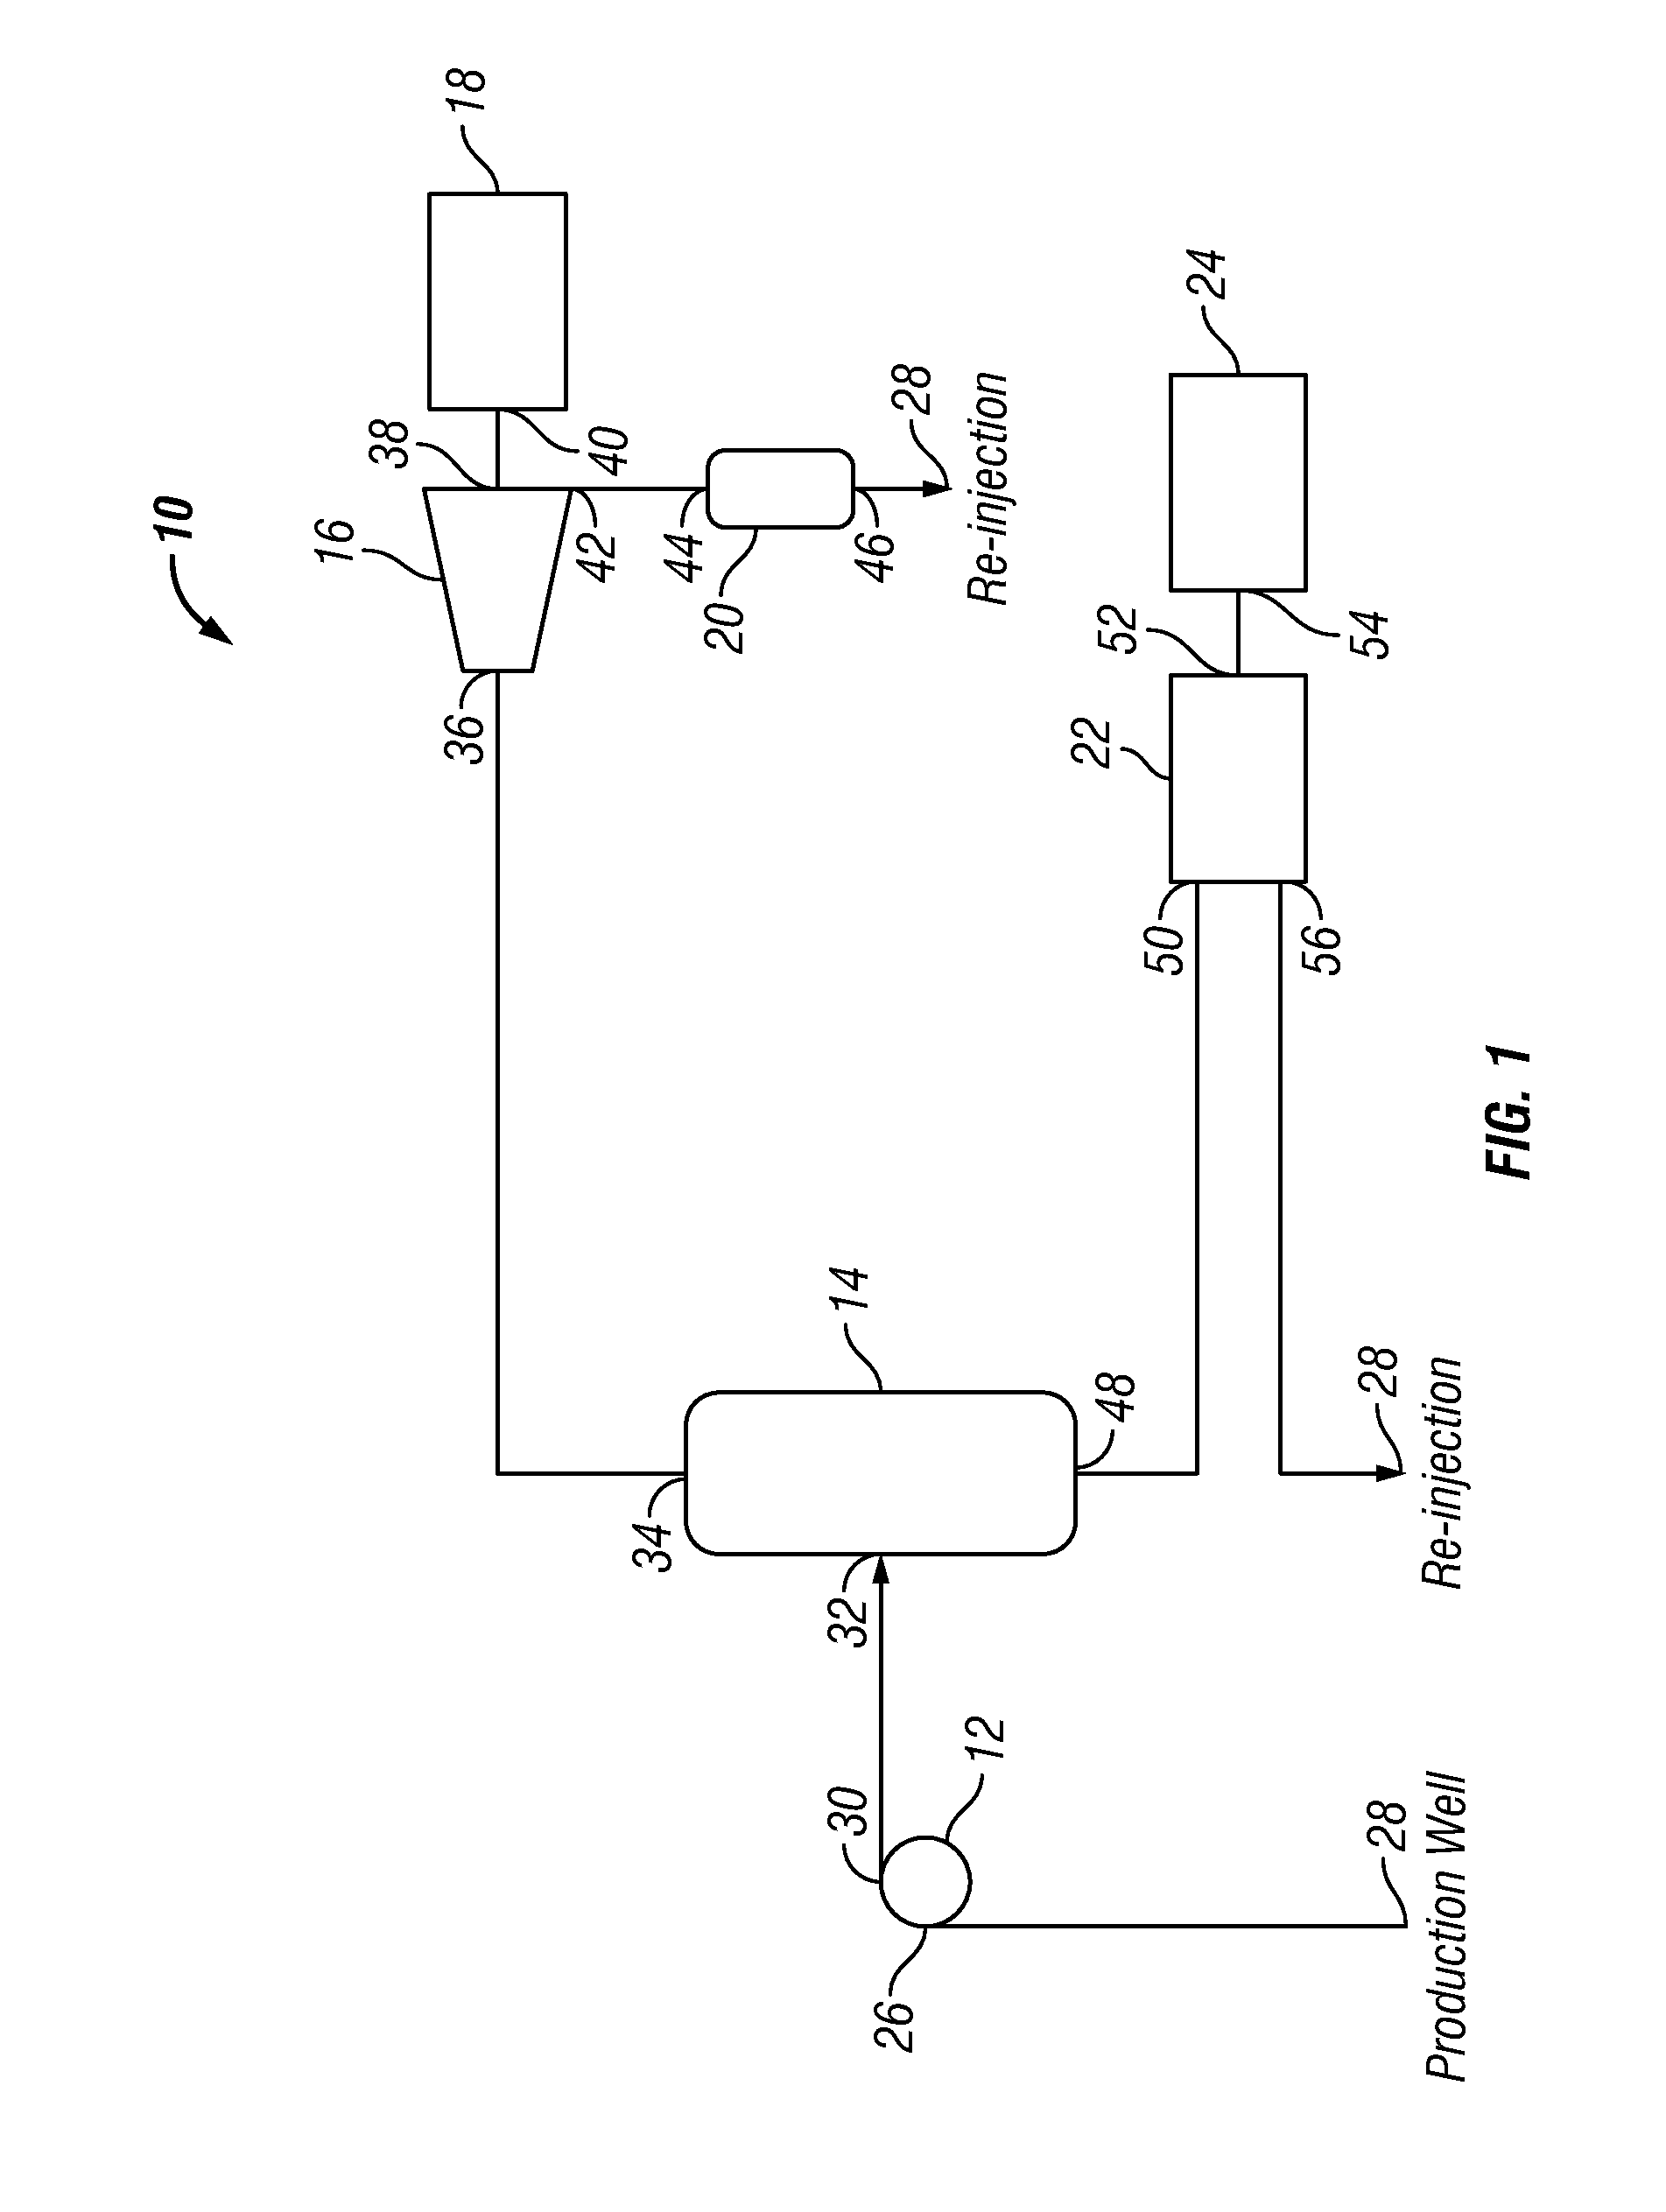 System and method to reduce the temperature of geothermal water to increase the capacity and efficiency while decreasing the costs associated with a geothermal power plant construction